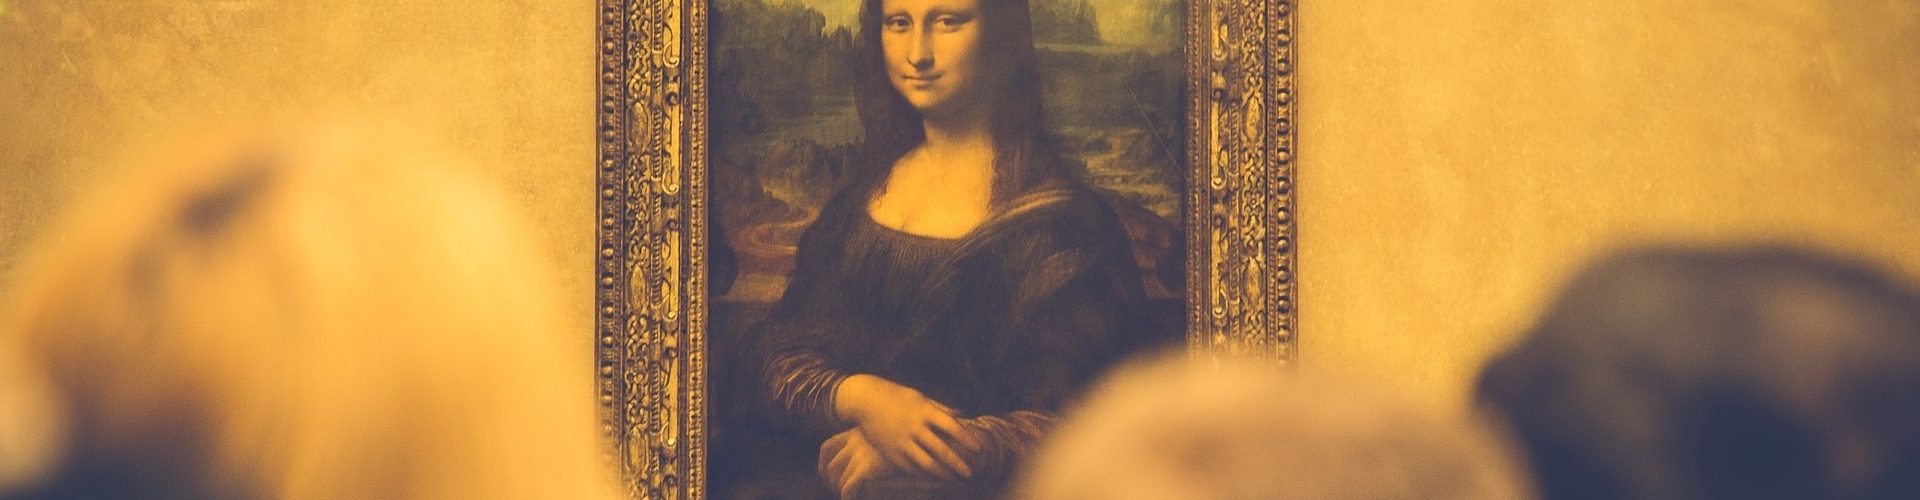 Watch the Mona Lisa brought to life with AI